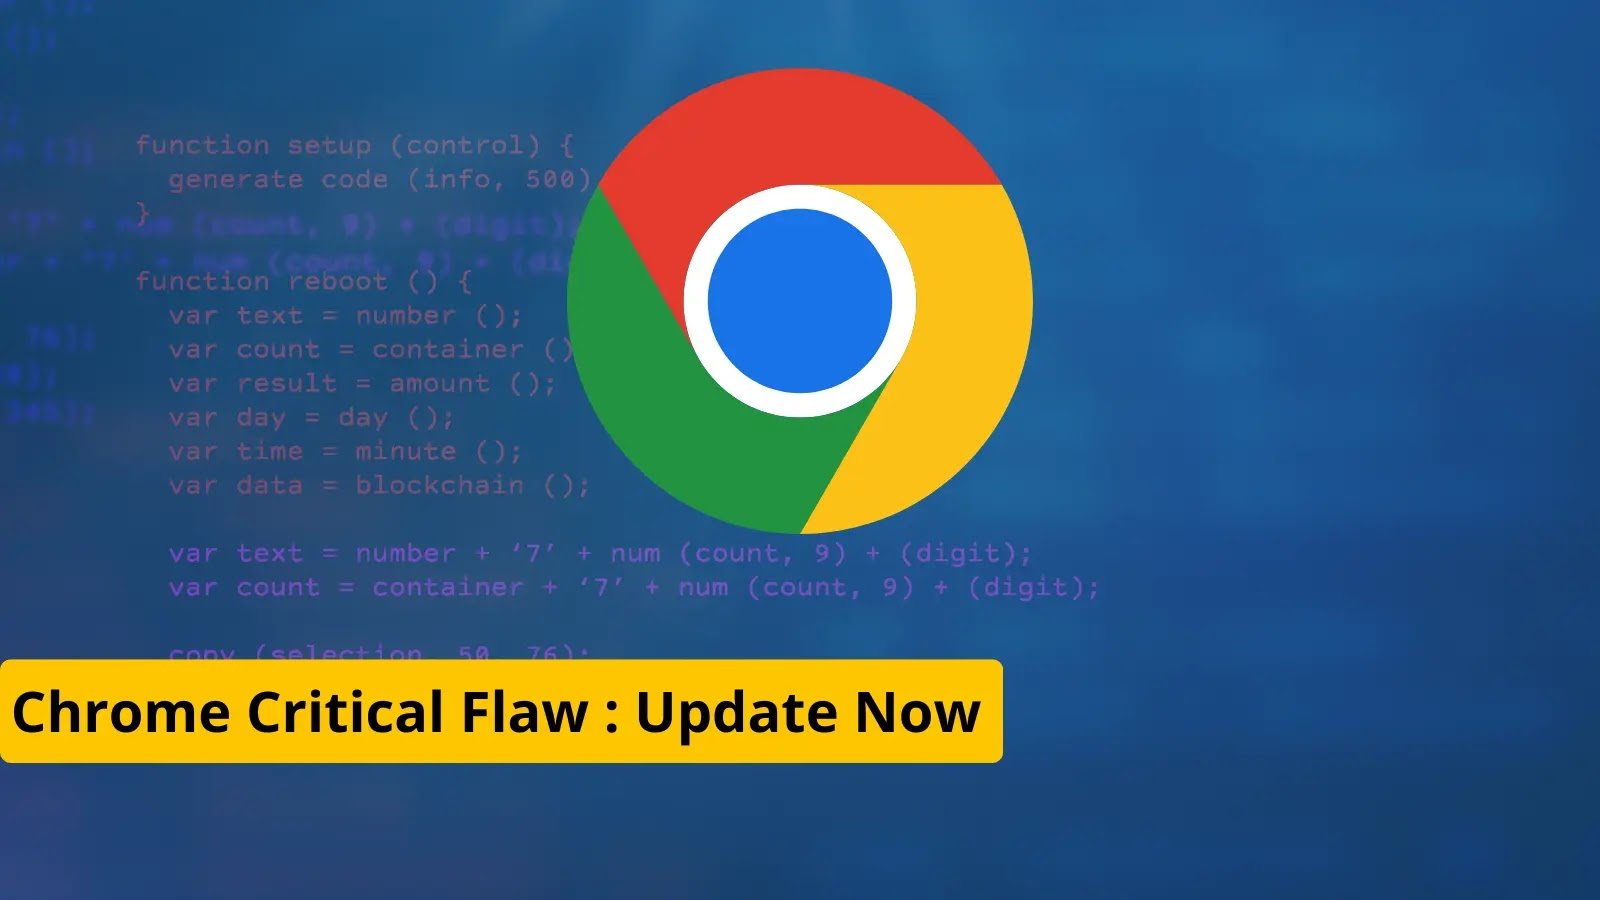 Chrome Critical Flaw Update Now